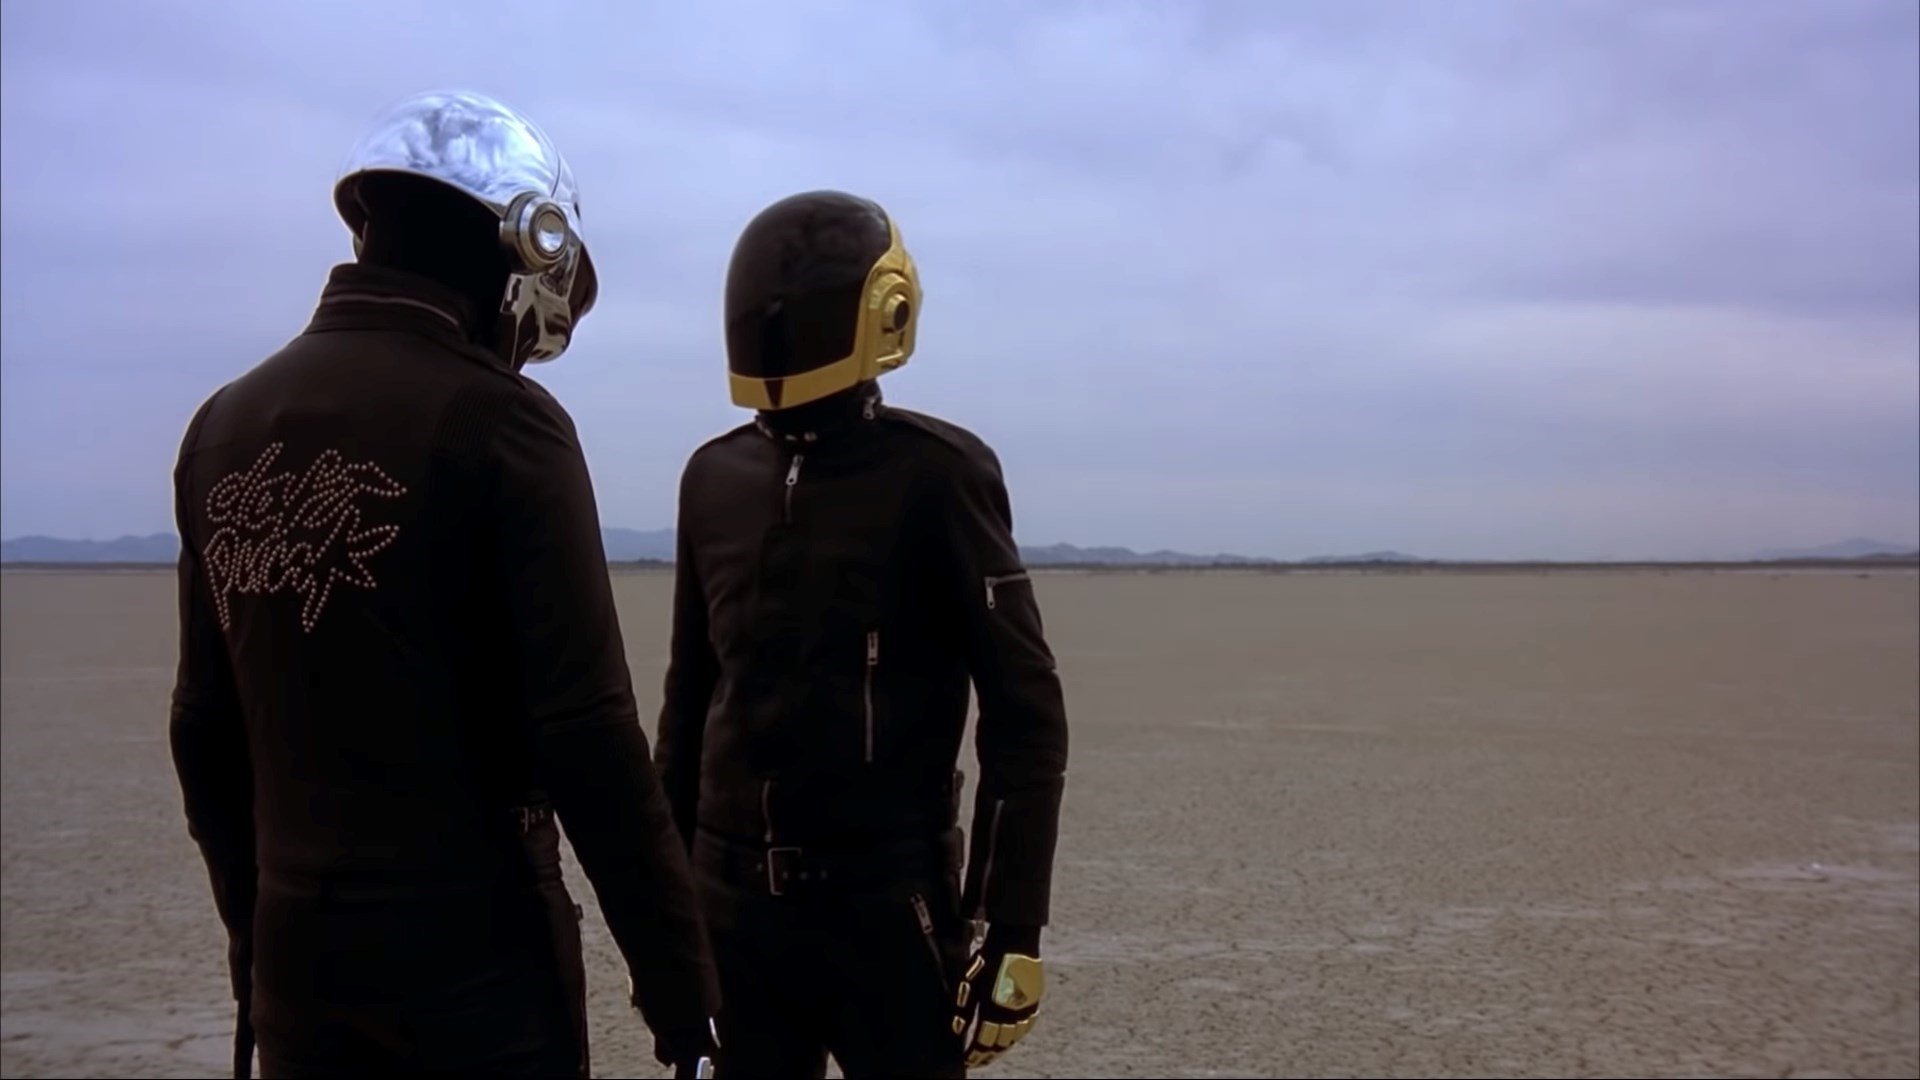 Daft Punk announce split with 8-minute video of them exploding